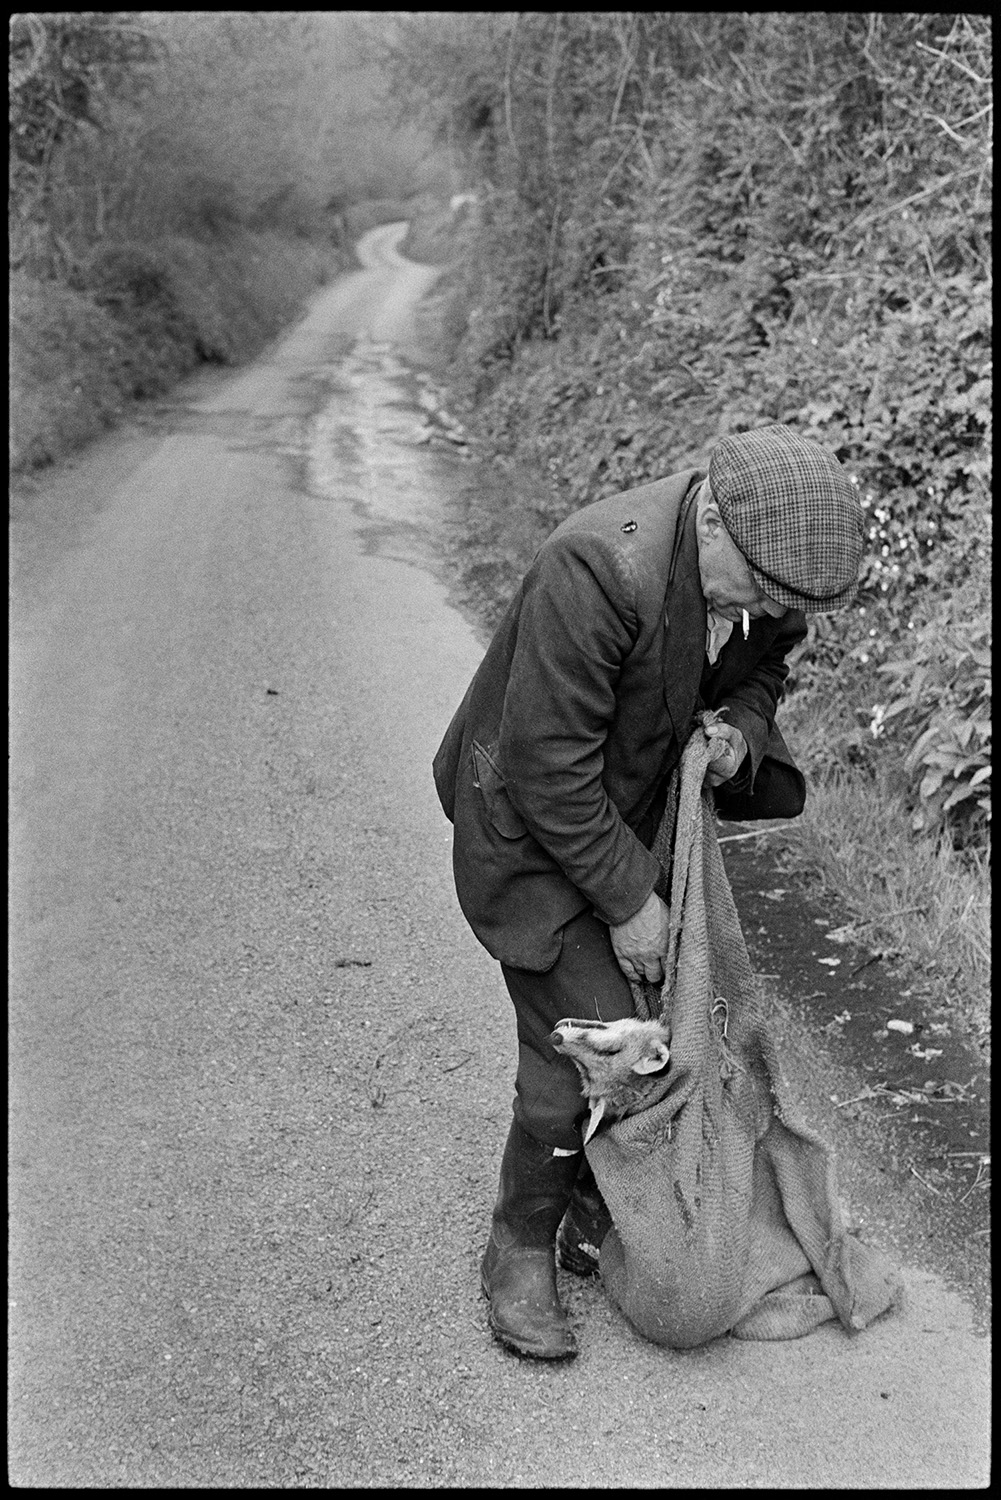 Fox caught in snare hanging in hedge, farmer taking it away in sack. 
[Ivor Brock putting a dead fox, which had been caught in a snare in a hedge, into a hessian sack, in a lane at Millhams, Dolton. He is smoking a cigarette.]